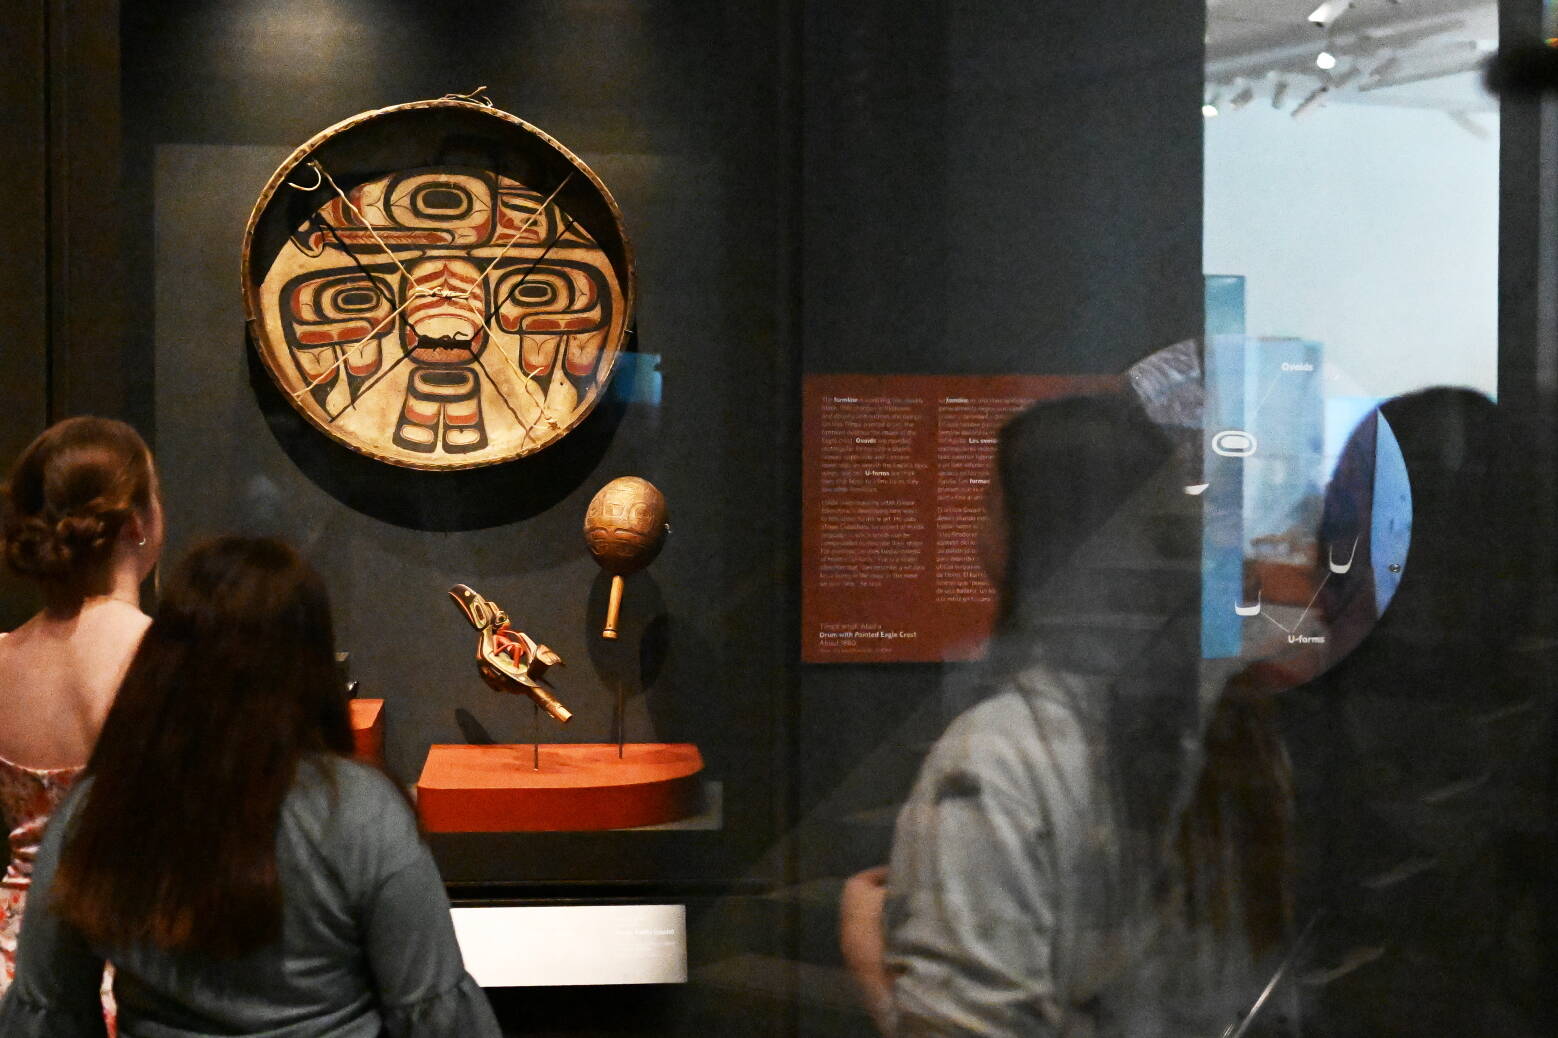 Visitors to the Denver Art Museum look at “Drum (Gaaw),” a cultural item from the Tlingit and Haida Indian Tribes of Alaska, on display in the Northwest Coast and Alaska Native Art Galleries on March 27. The tribes, from Southeast Alaska, have been trying to reclaim their cultural items from the Denver Art Museum for more than 30 years. (RJ Sangosti/The Denver Post)